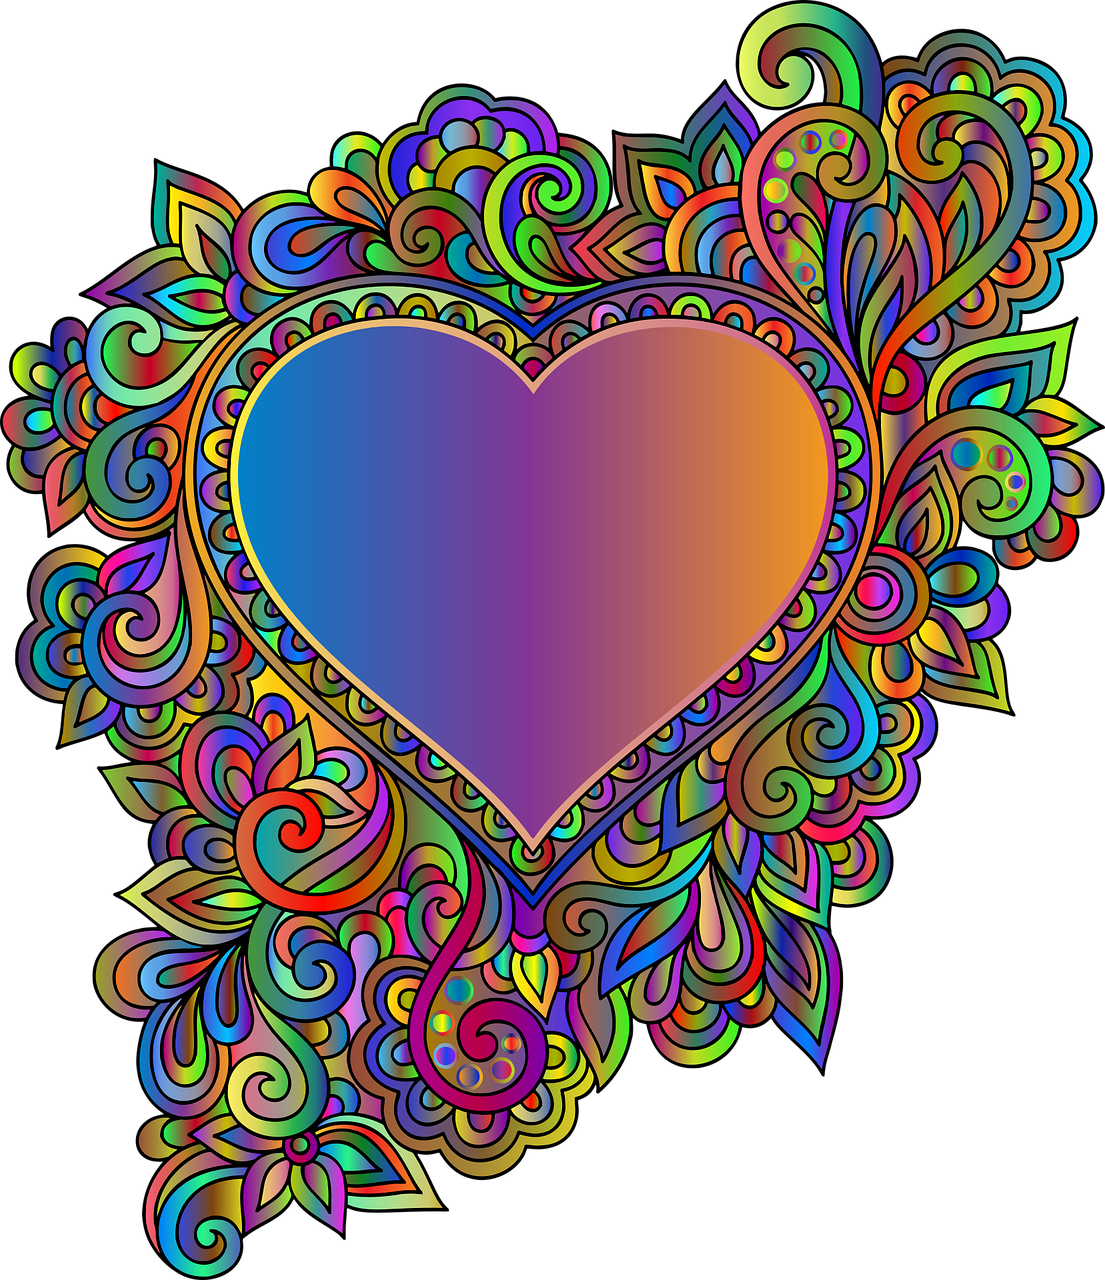 a colorful heart on a black background, psychedelic art, ornate borders + concept art, created in adobe illustrator, with gradients, doodle hand drawn